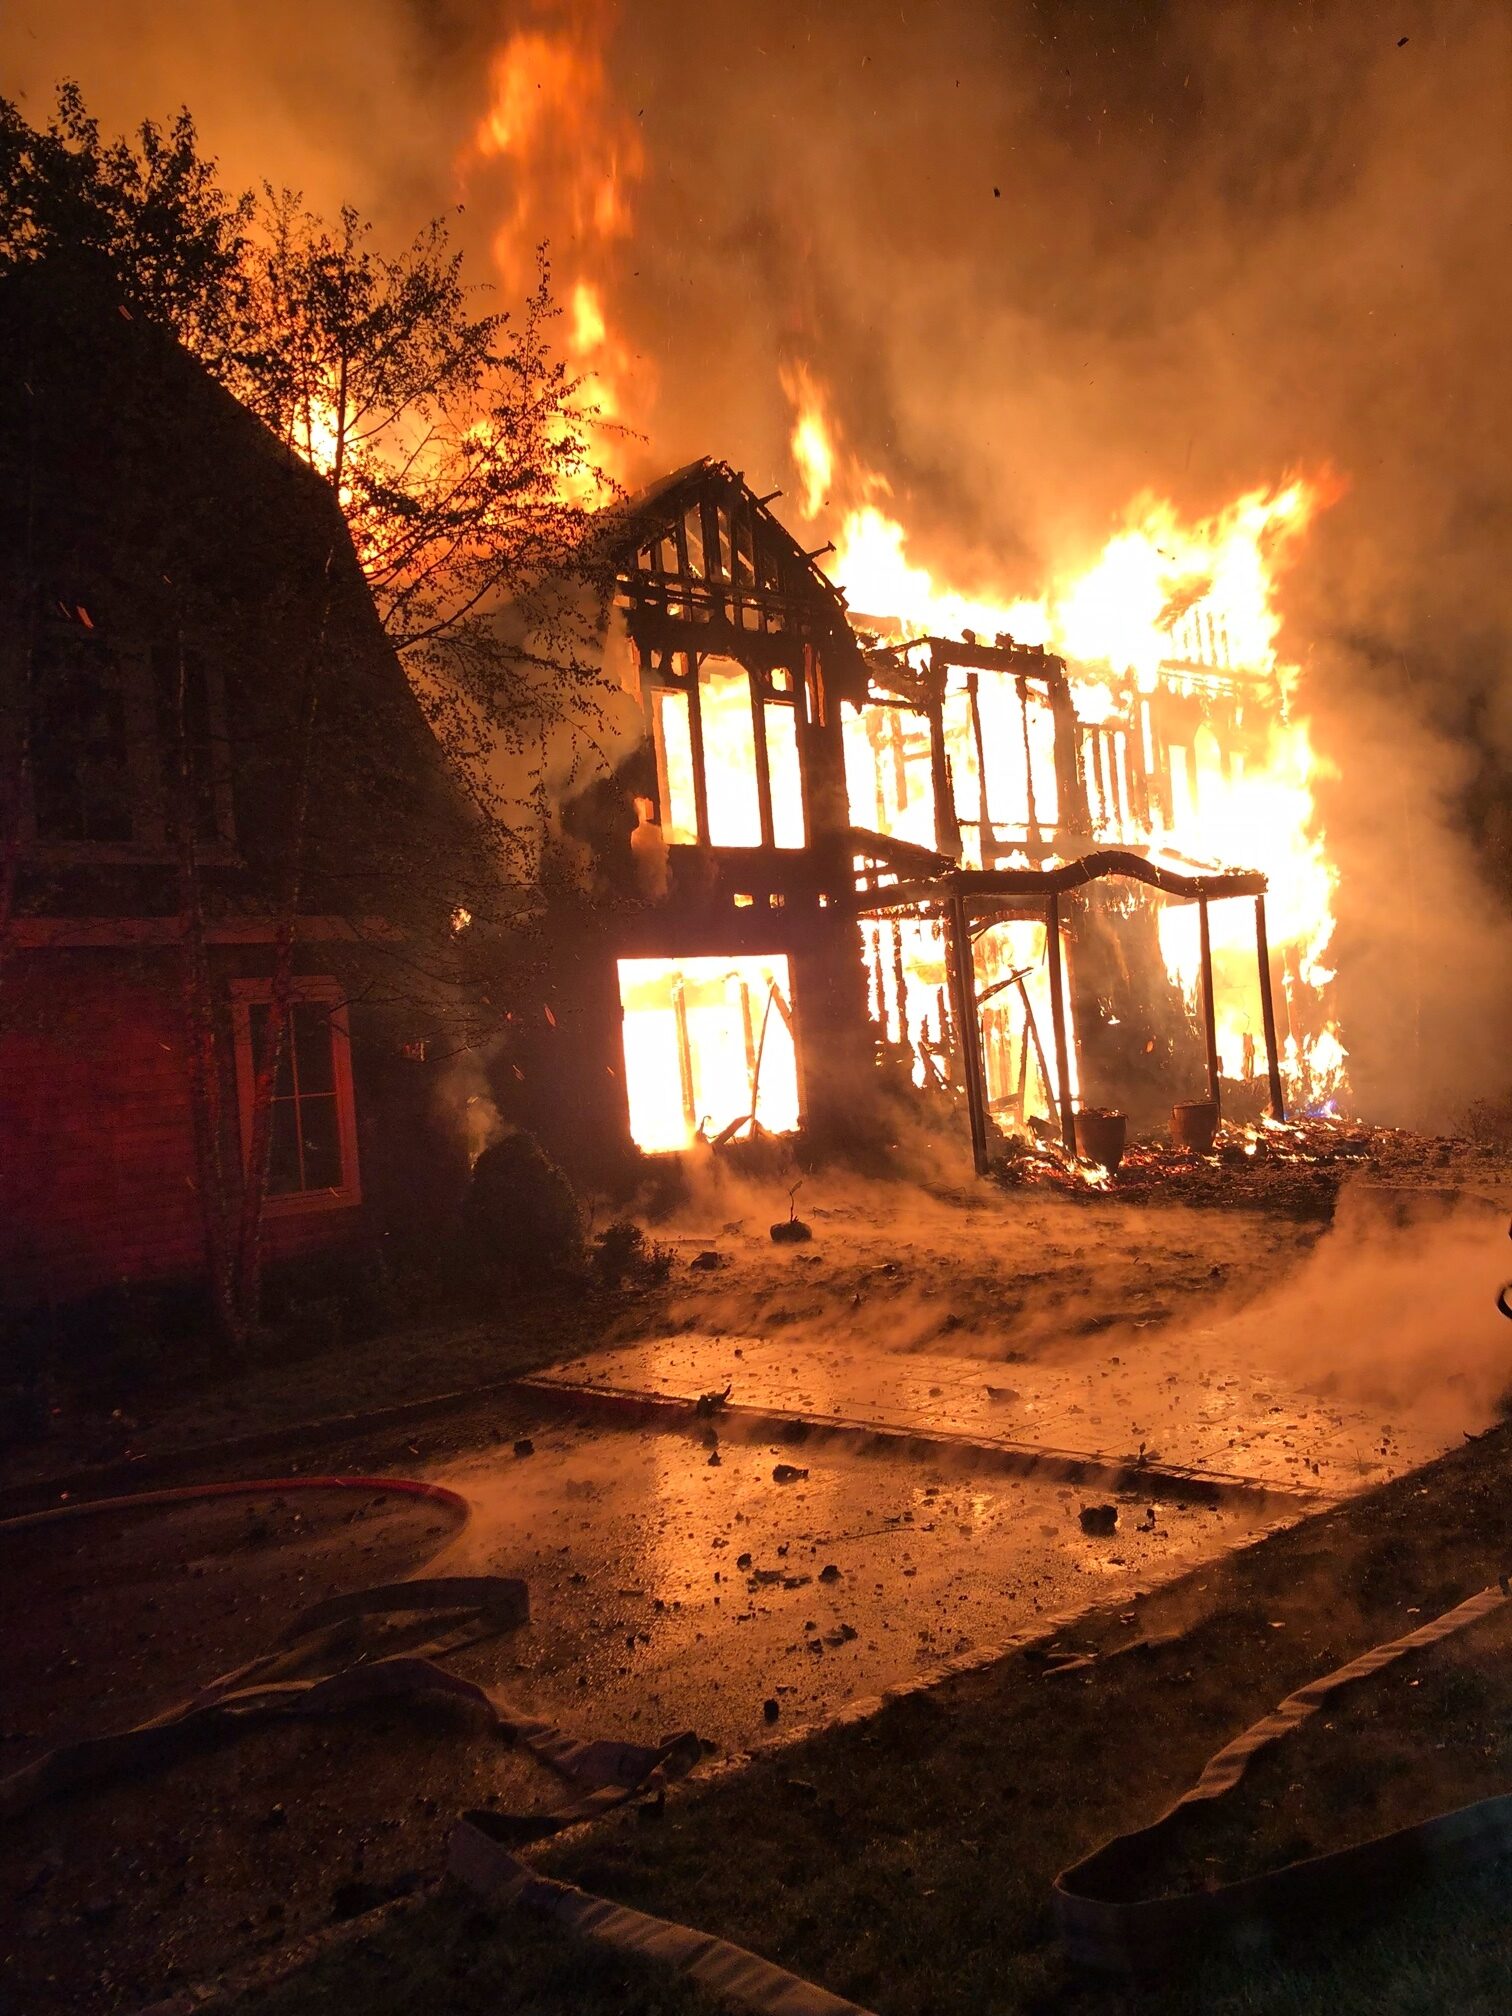 A massive fire in Bridgehampton destroyed one home and damaged others.